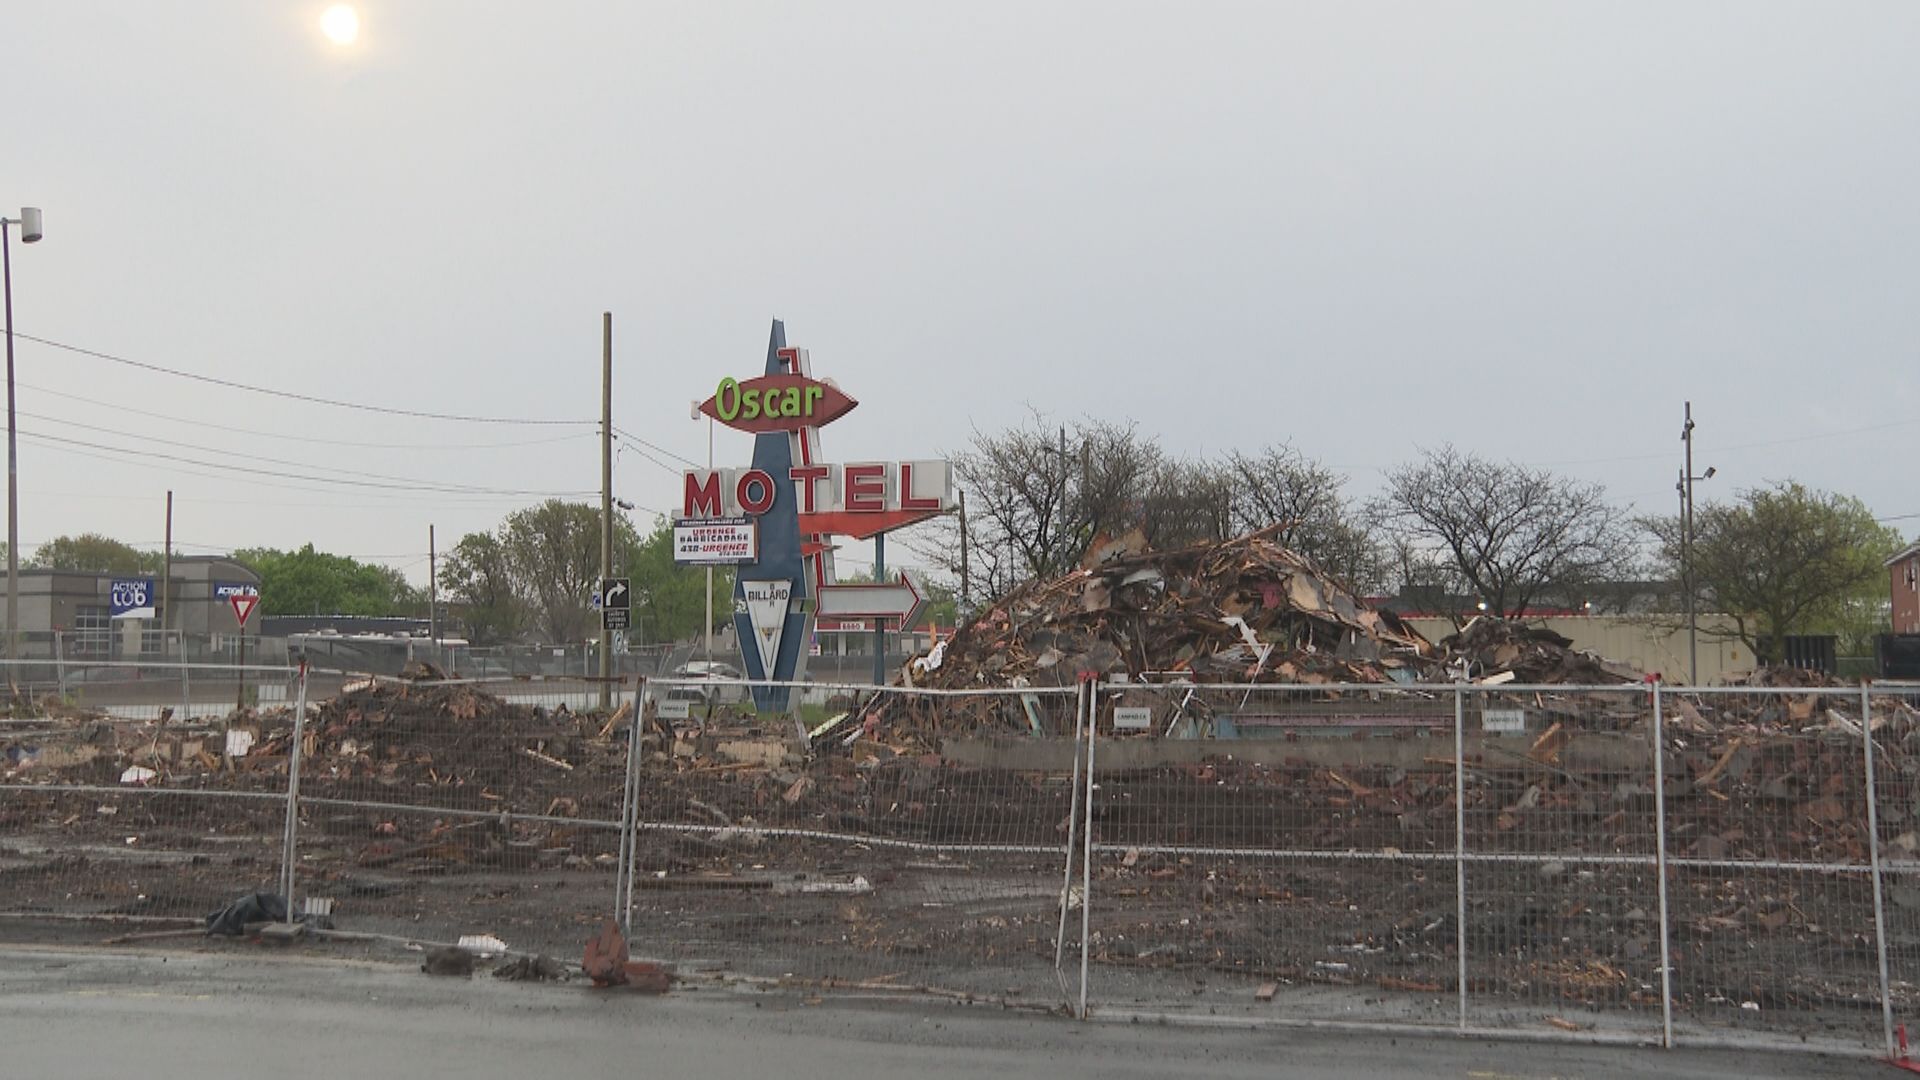 Former Oscar Motel property to be cleared of mountains of debris